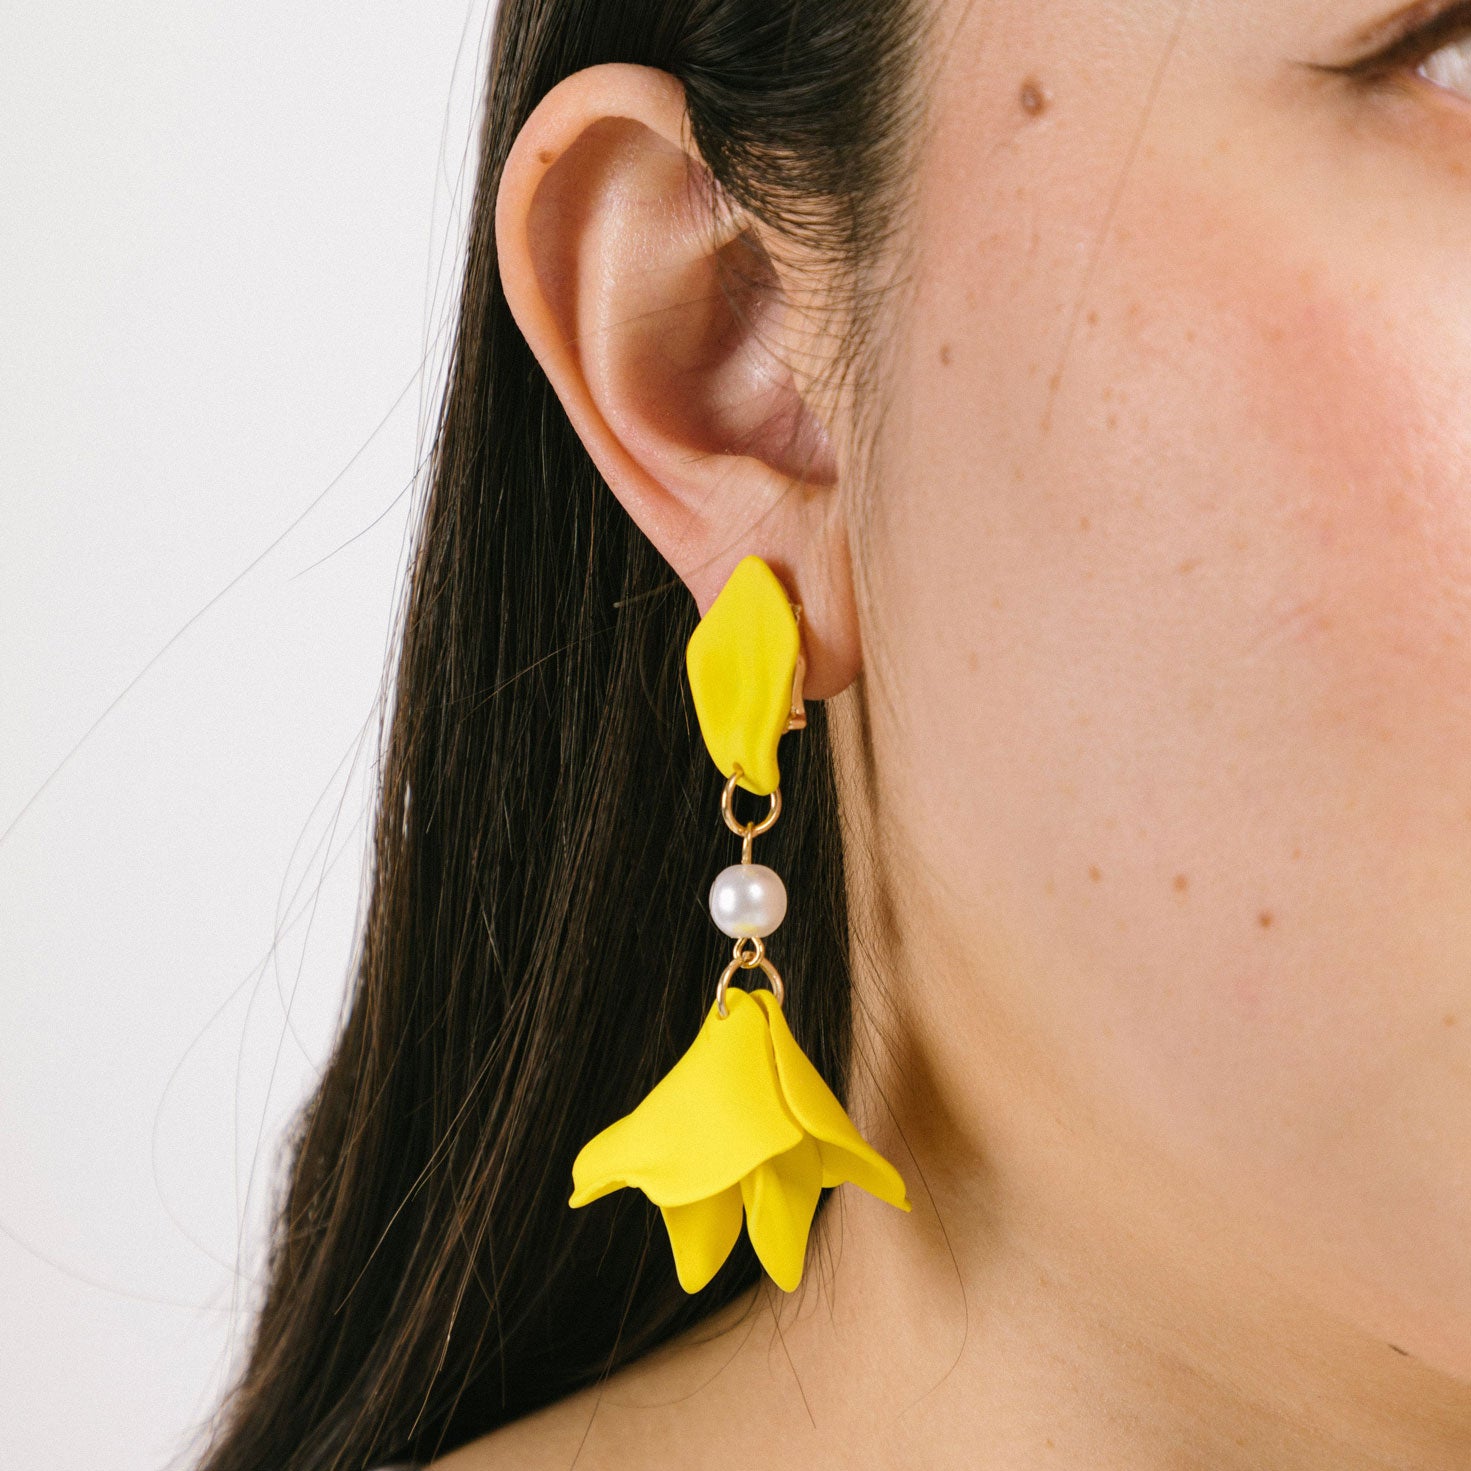 A model wearing the Metallic Petal Clip On Earrings feature a secure, padded clip-on closure for comfortable wear. Suitable for all ear types, they hold strong for up to 12 hours and have a simulated pearl finish. Each order comes with one pair. Materials include acrylic and simulated pearl. Clips feature removable rubber padding.